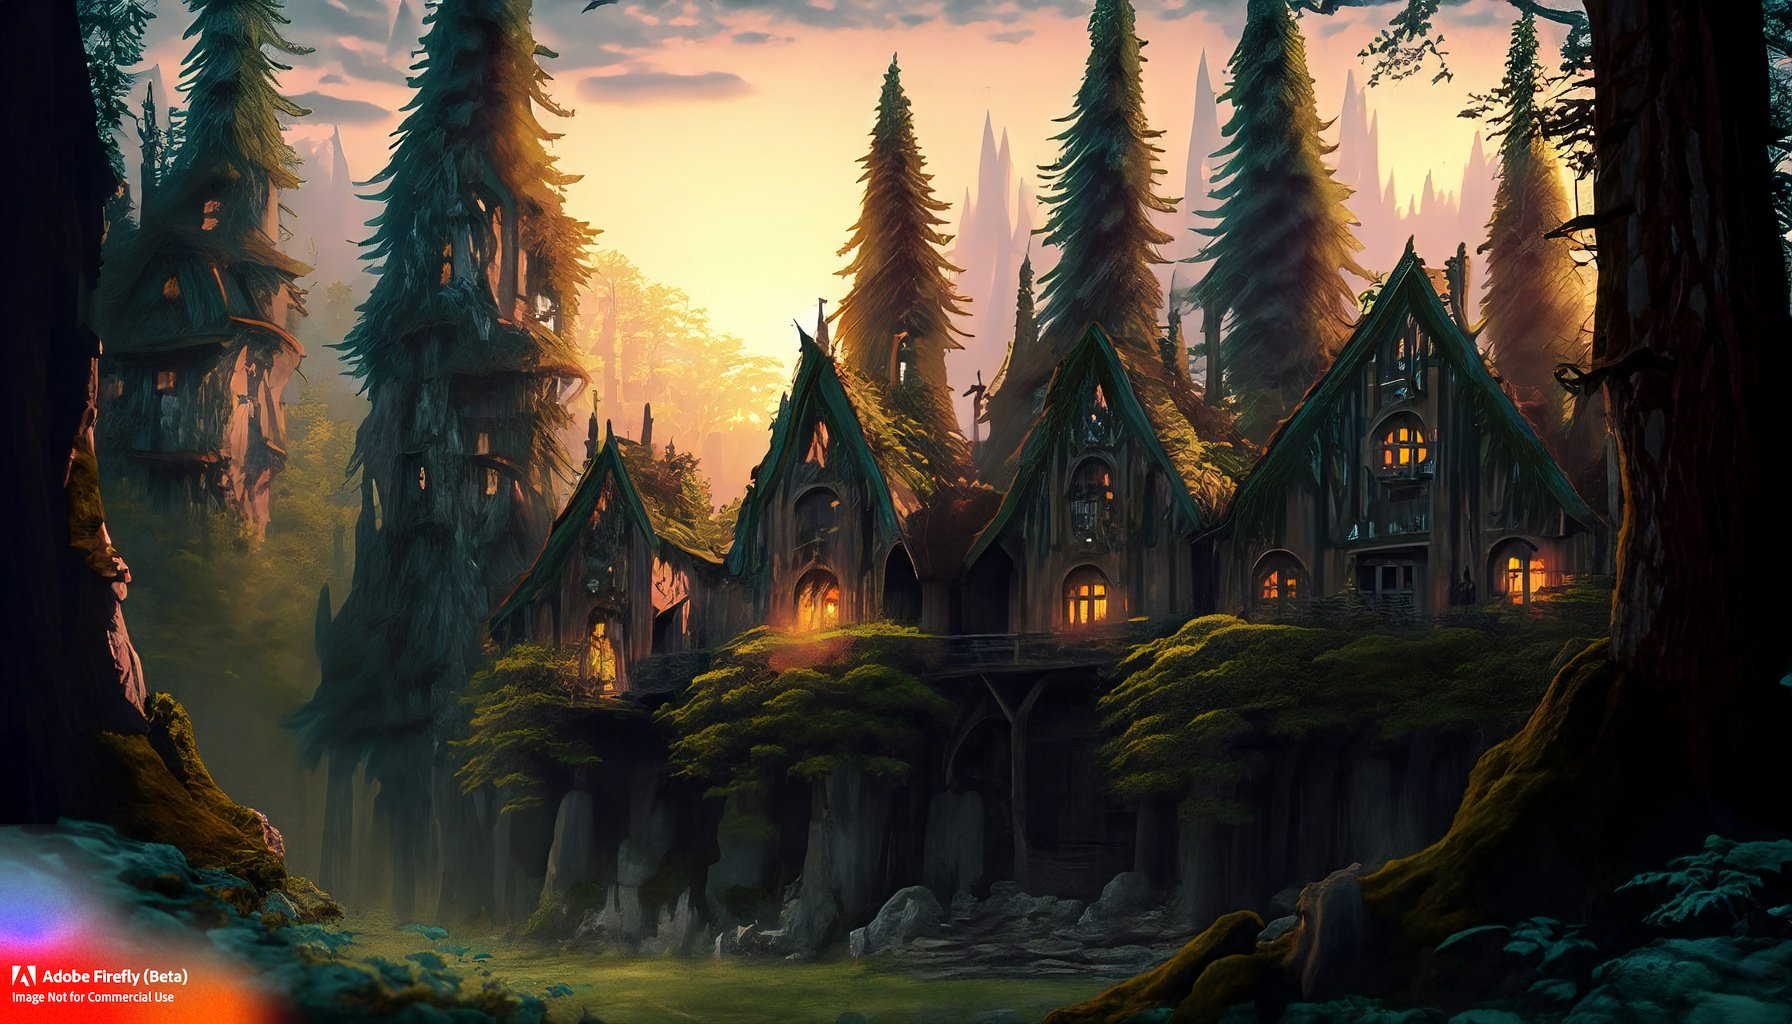 Firefly_mistward,+fae outpost of buildings deep in the woods, surrounded by tall evergreens, at sunset_art,wide_angle_86265.jpg